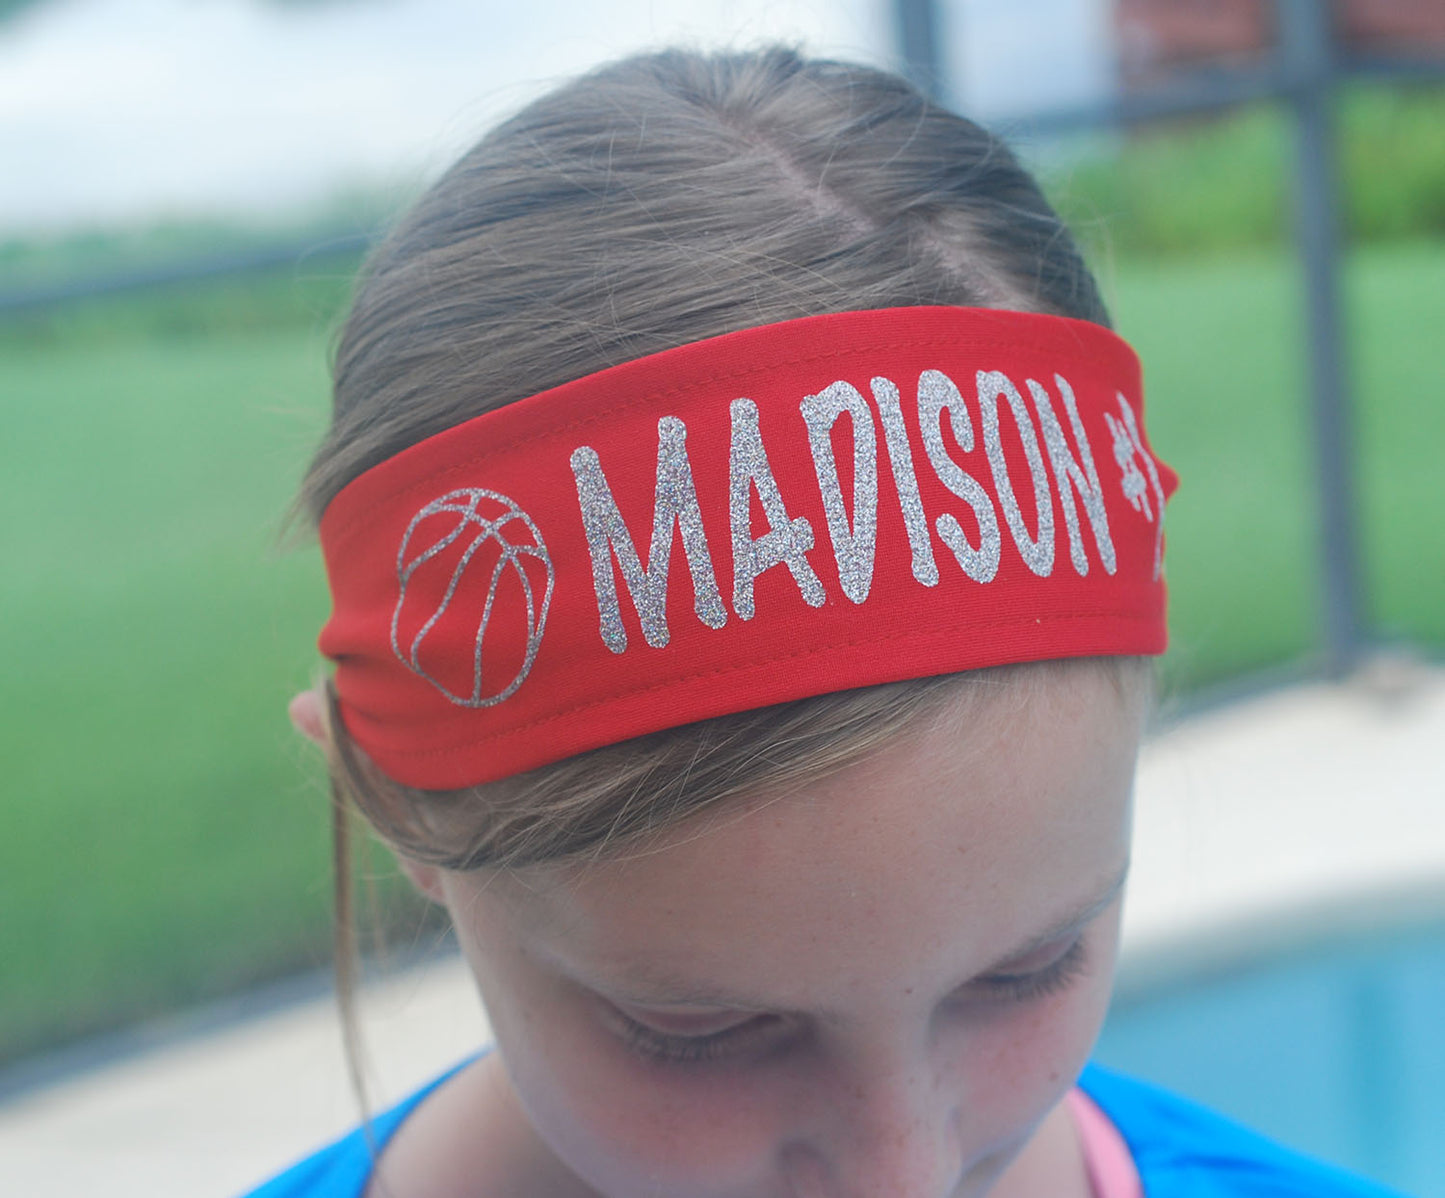 Personalized FOOTBALL TIE Headband - Sparkle Letters!